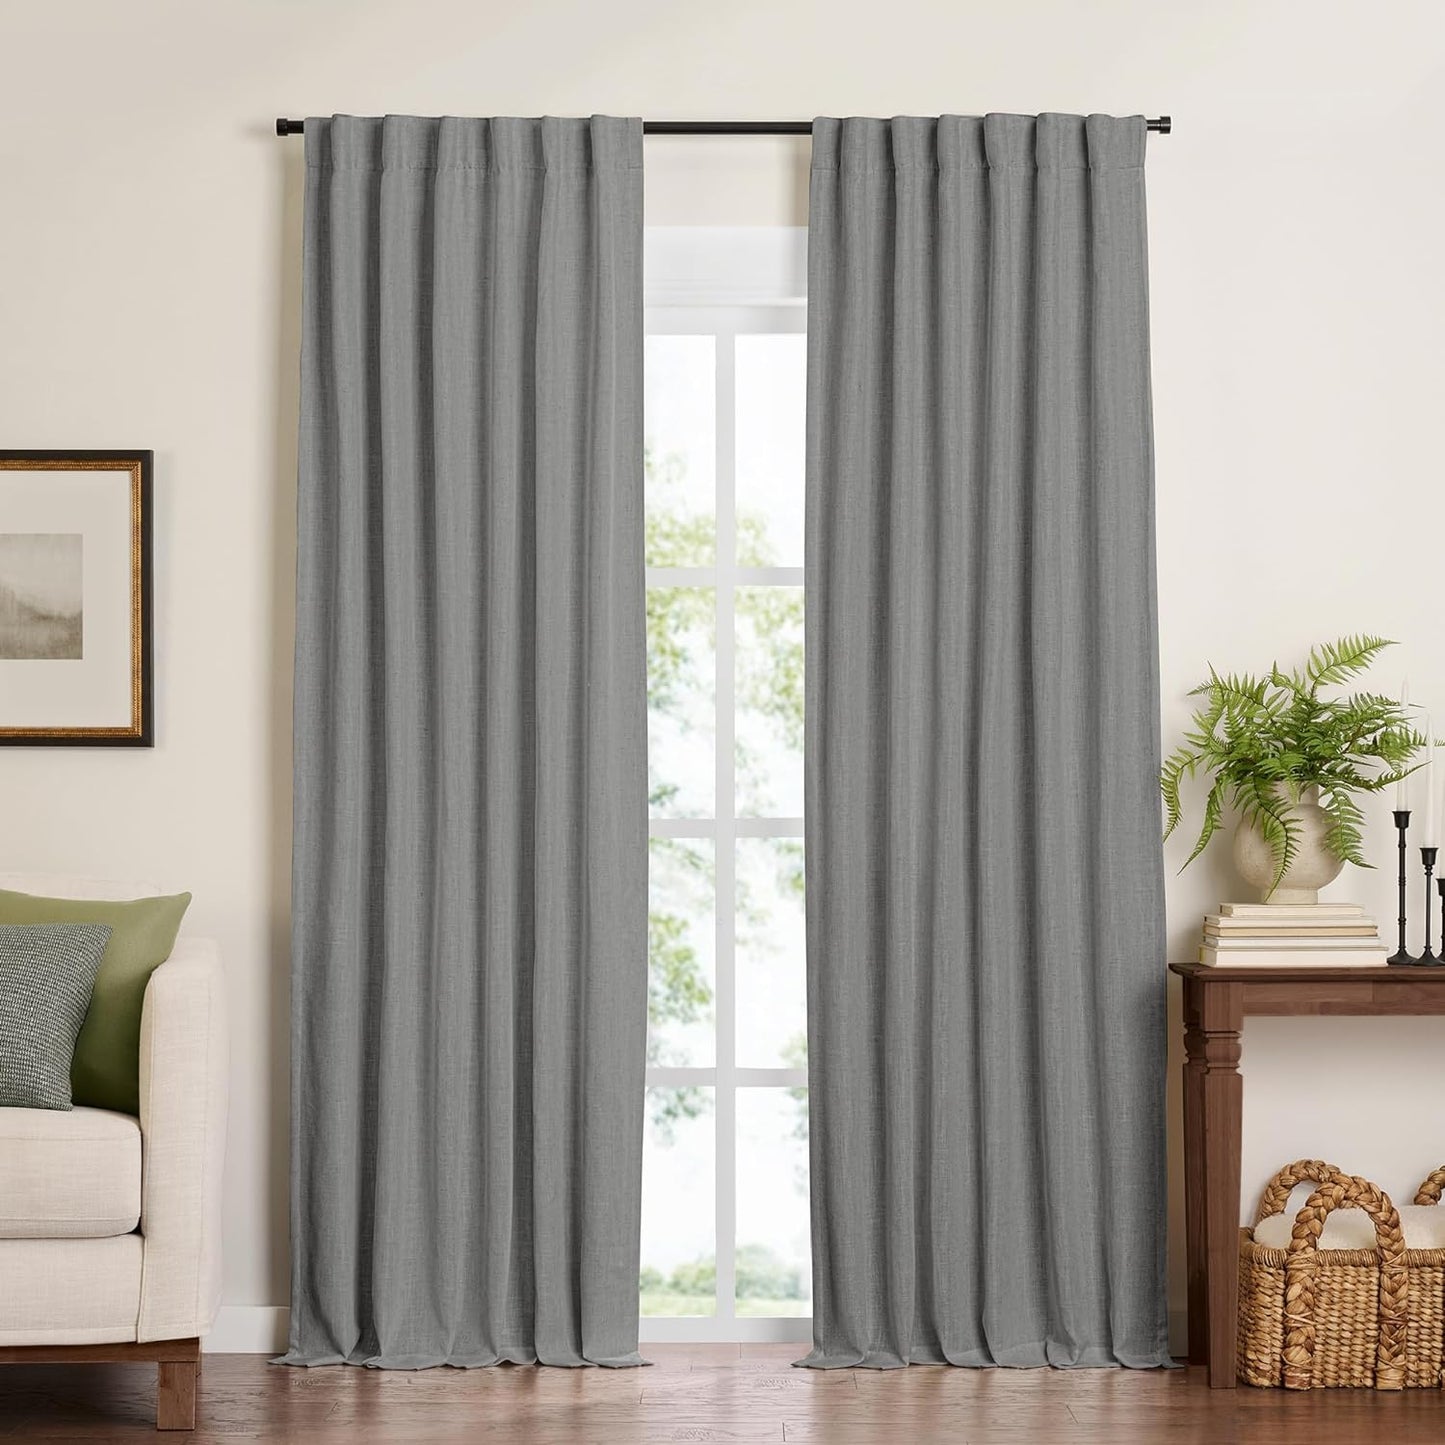 Elrene Home Fashions Harrow Solid Texture Blackout Single Window Curtain Panel, 52"X84", Natural  Elrene Home Fashions Dark Gray 52"X108" (1 Panel) 